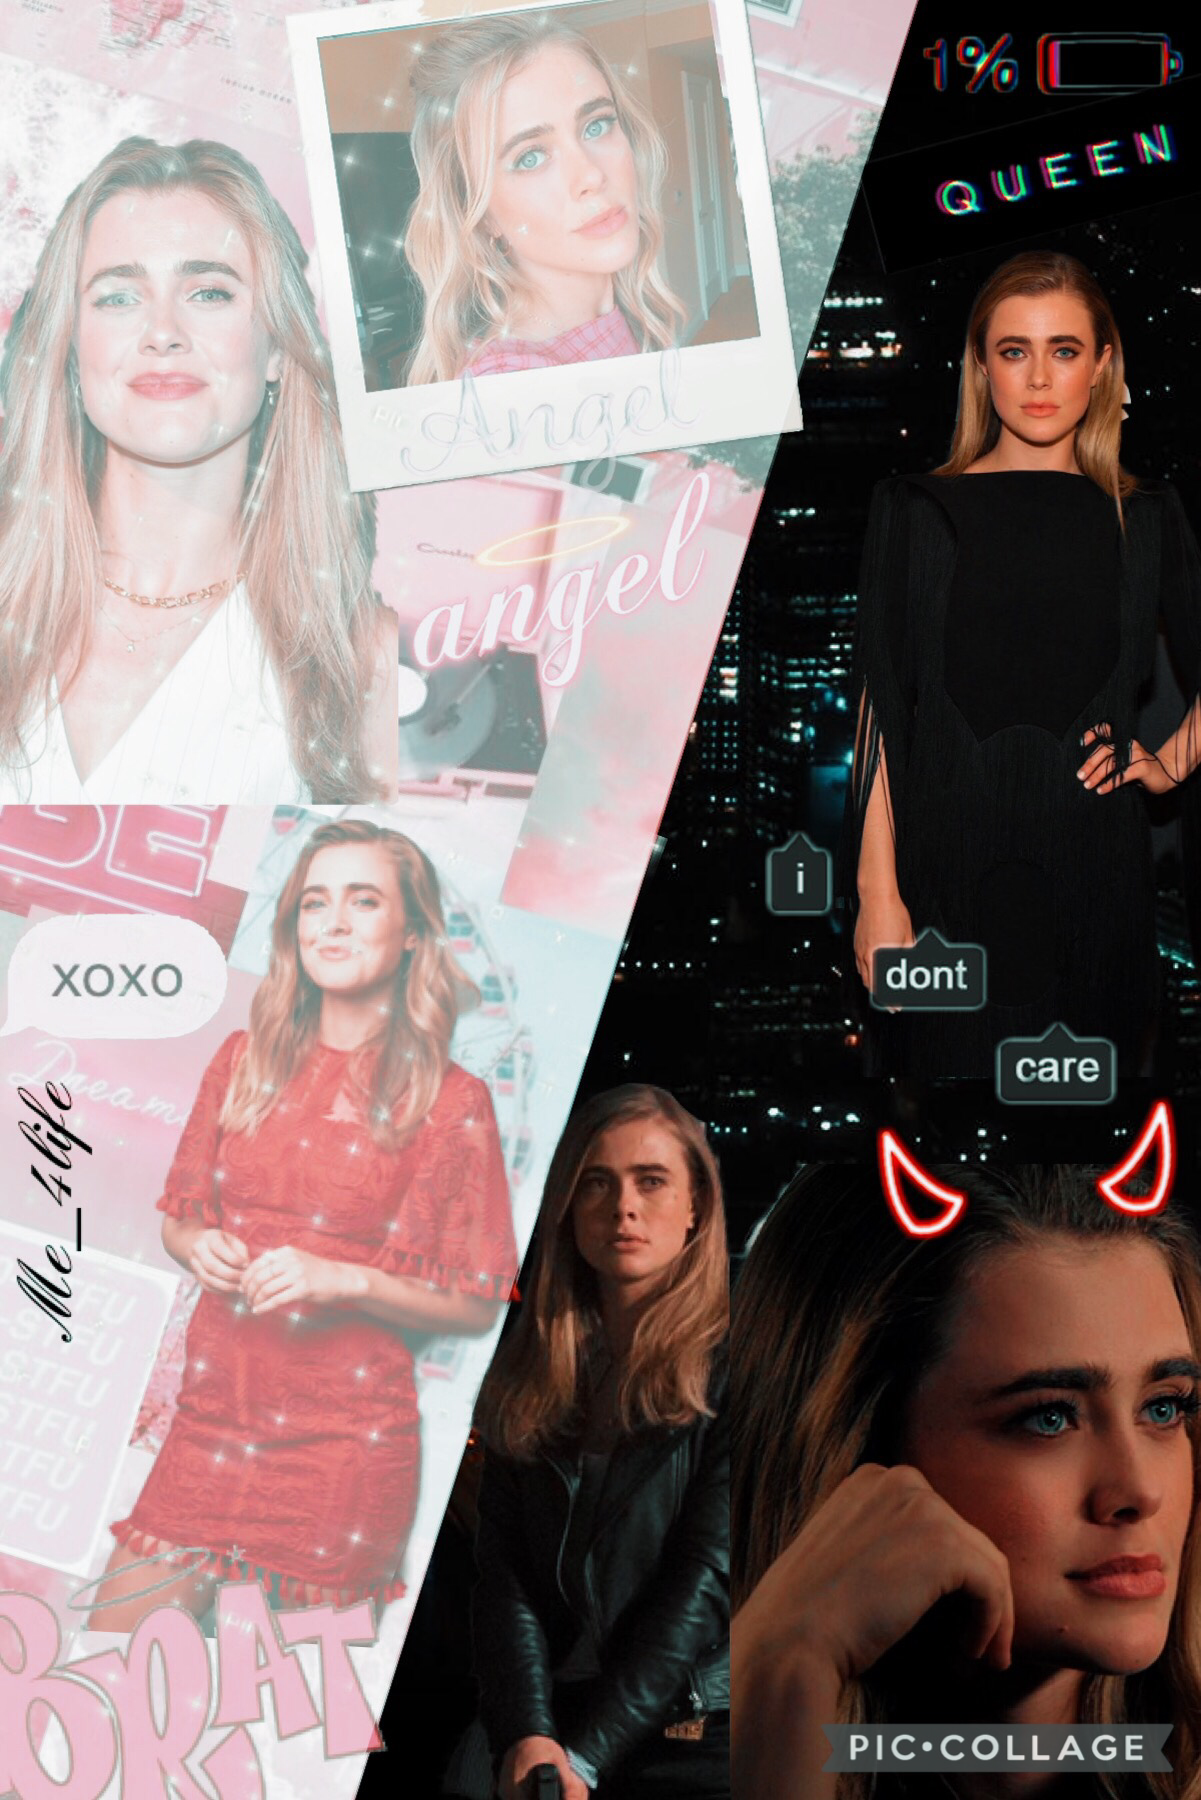 Melissa Roxburgh✨
Kinda obsessed with this✌️ Merry Christmas Eve to those who celebrate 🎉🎄